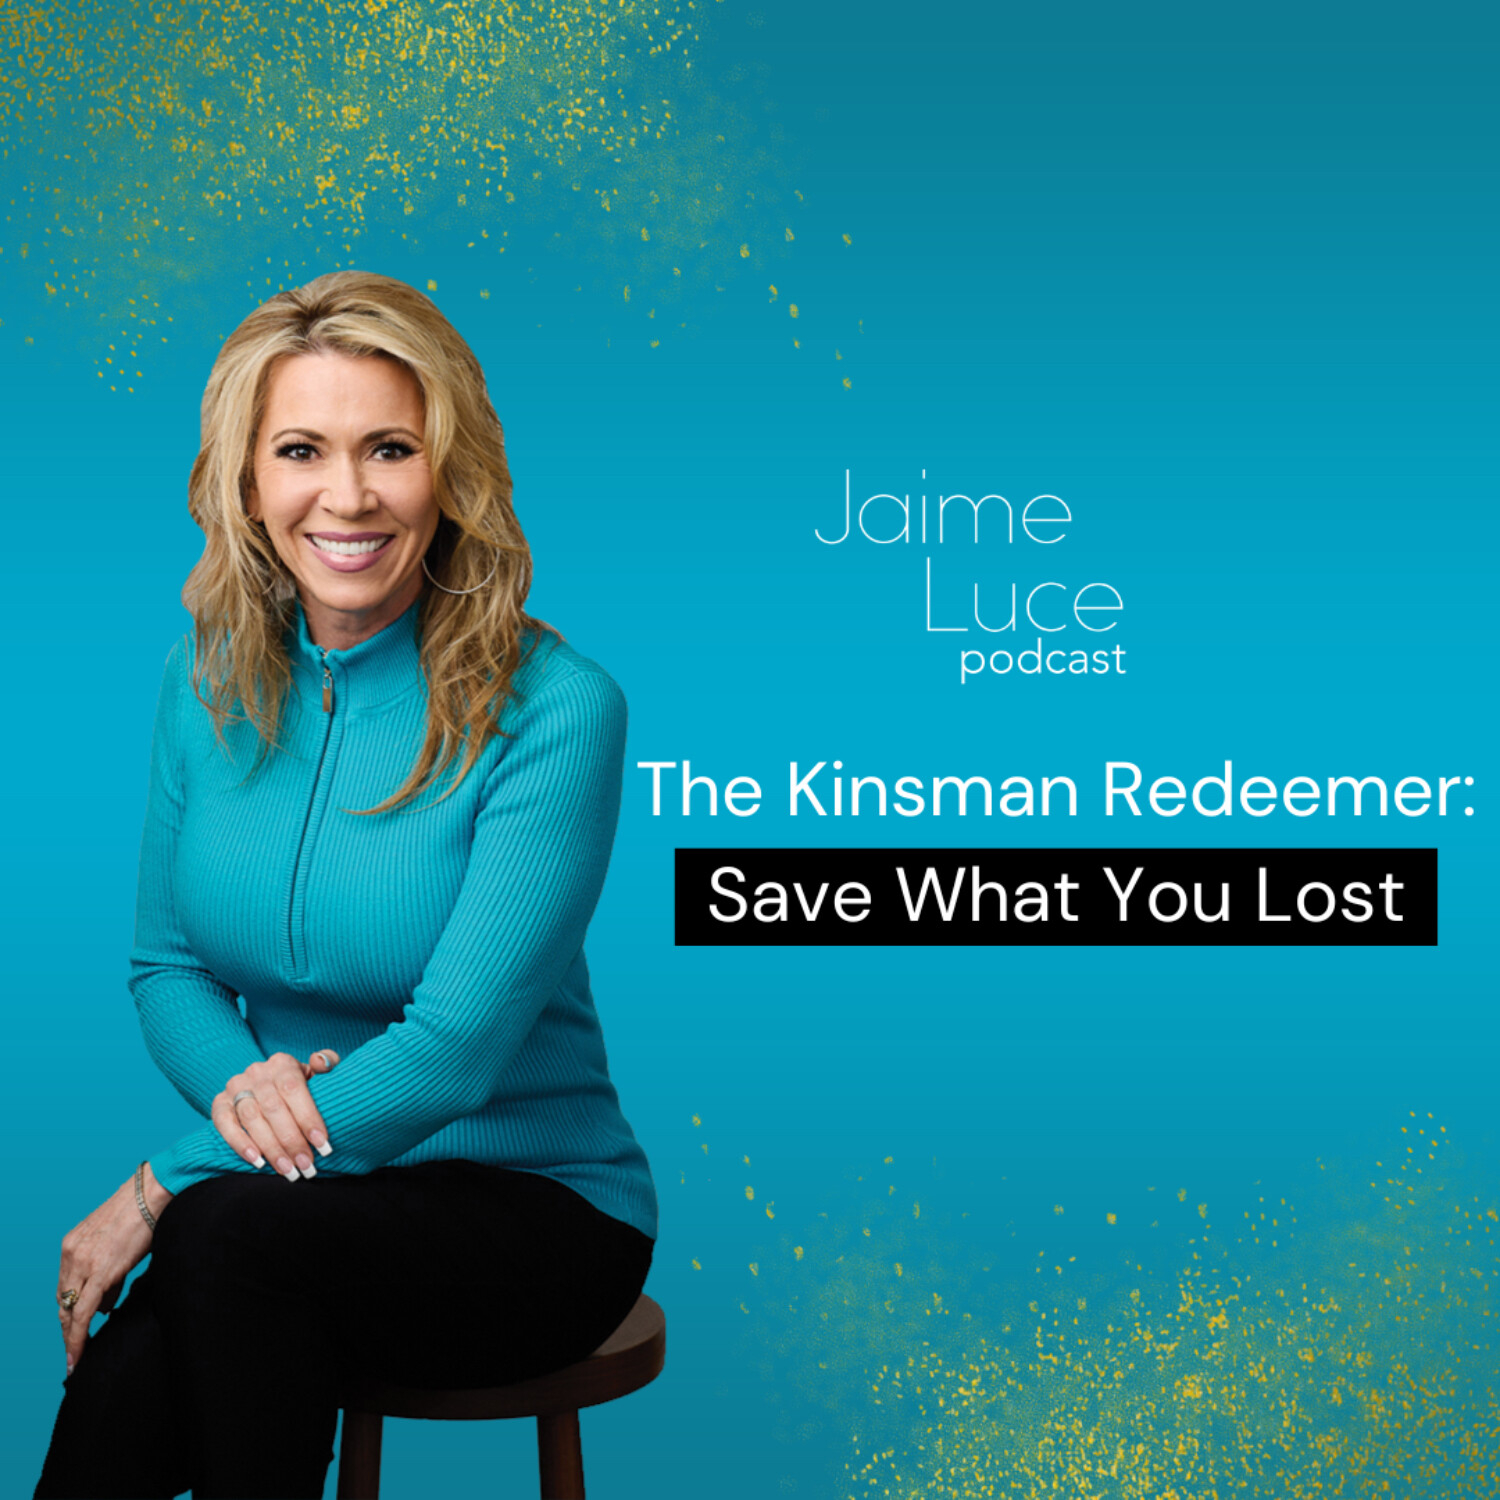 The Kinsman Redeemer: Save What You Lost